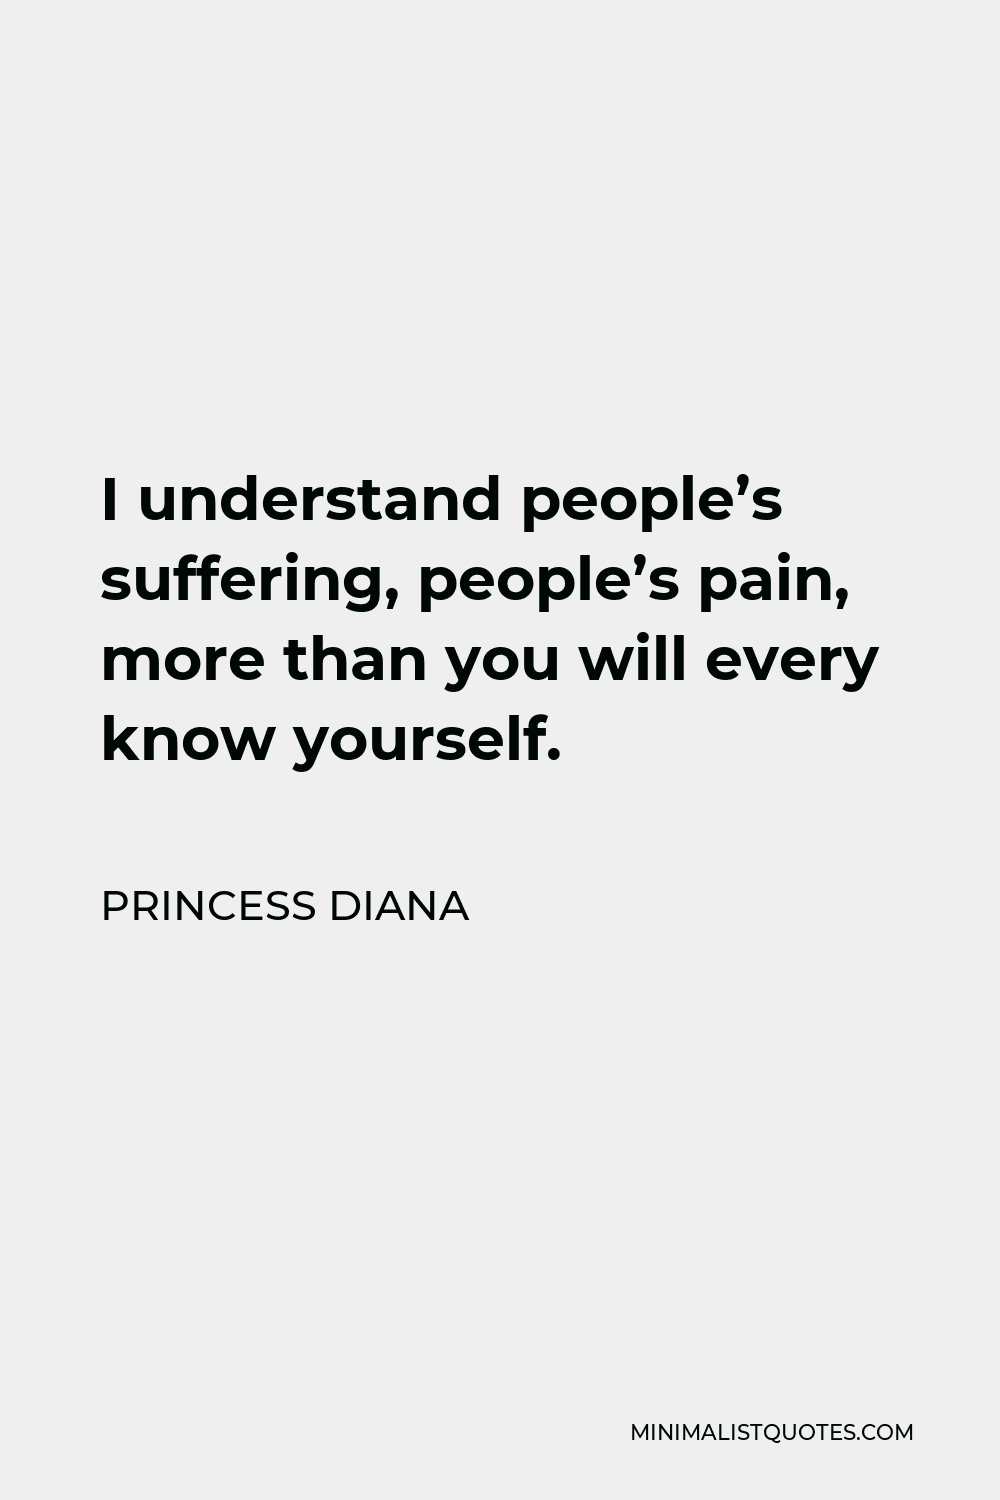 Princess Diana Quote - I understand people’s suffering, people’s pain, more than you will every know yourself.